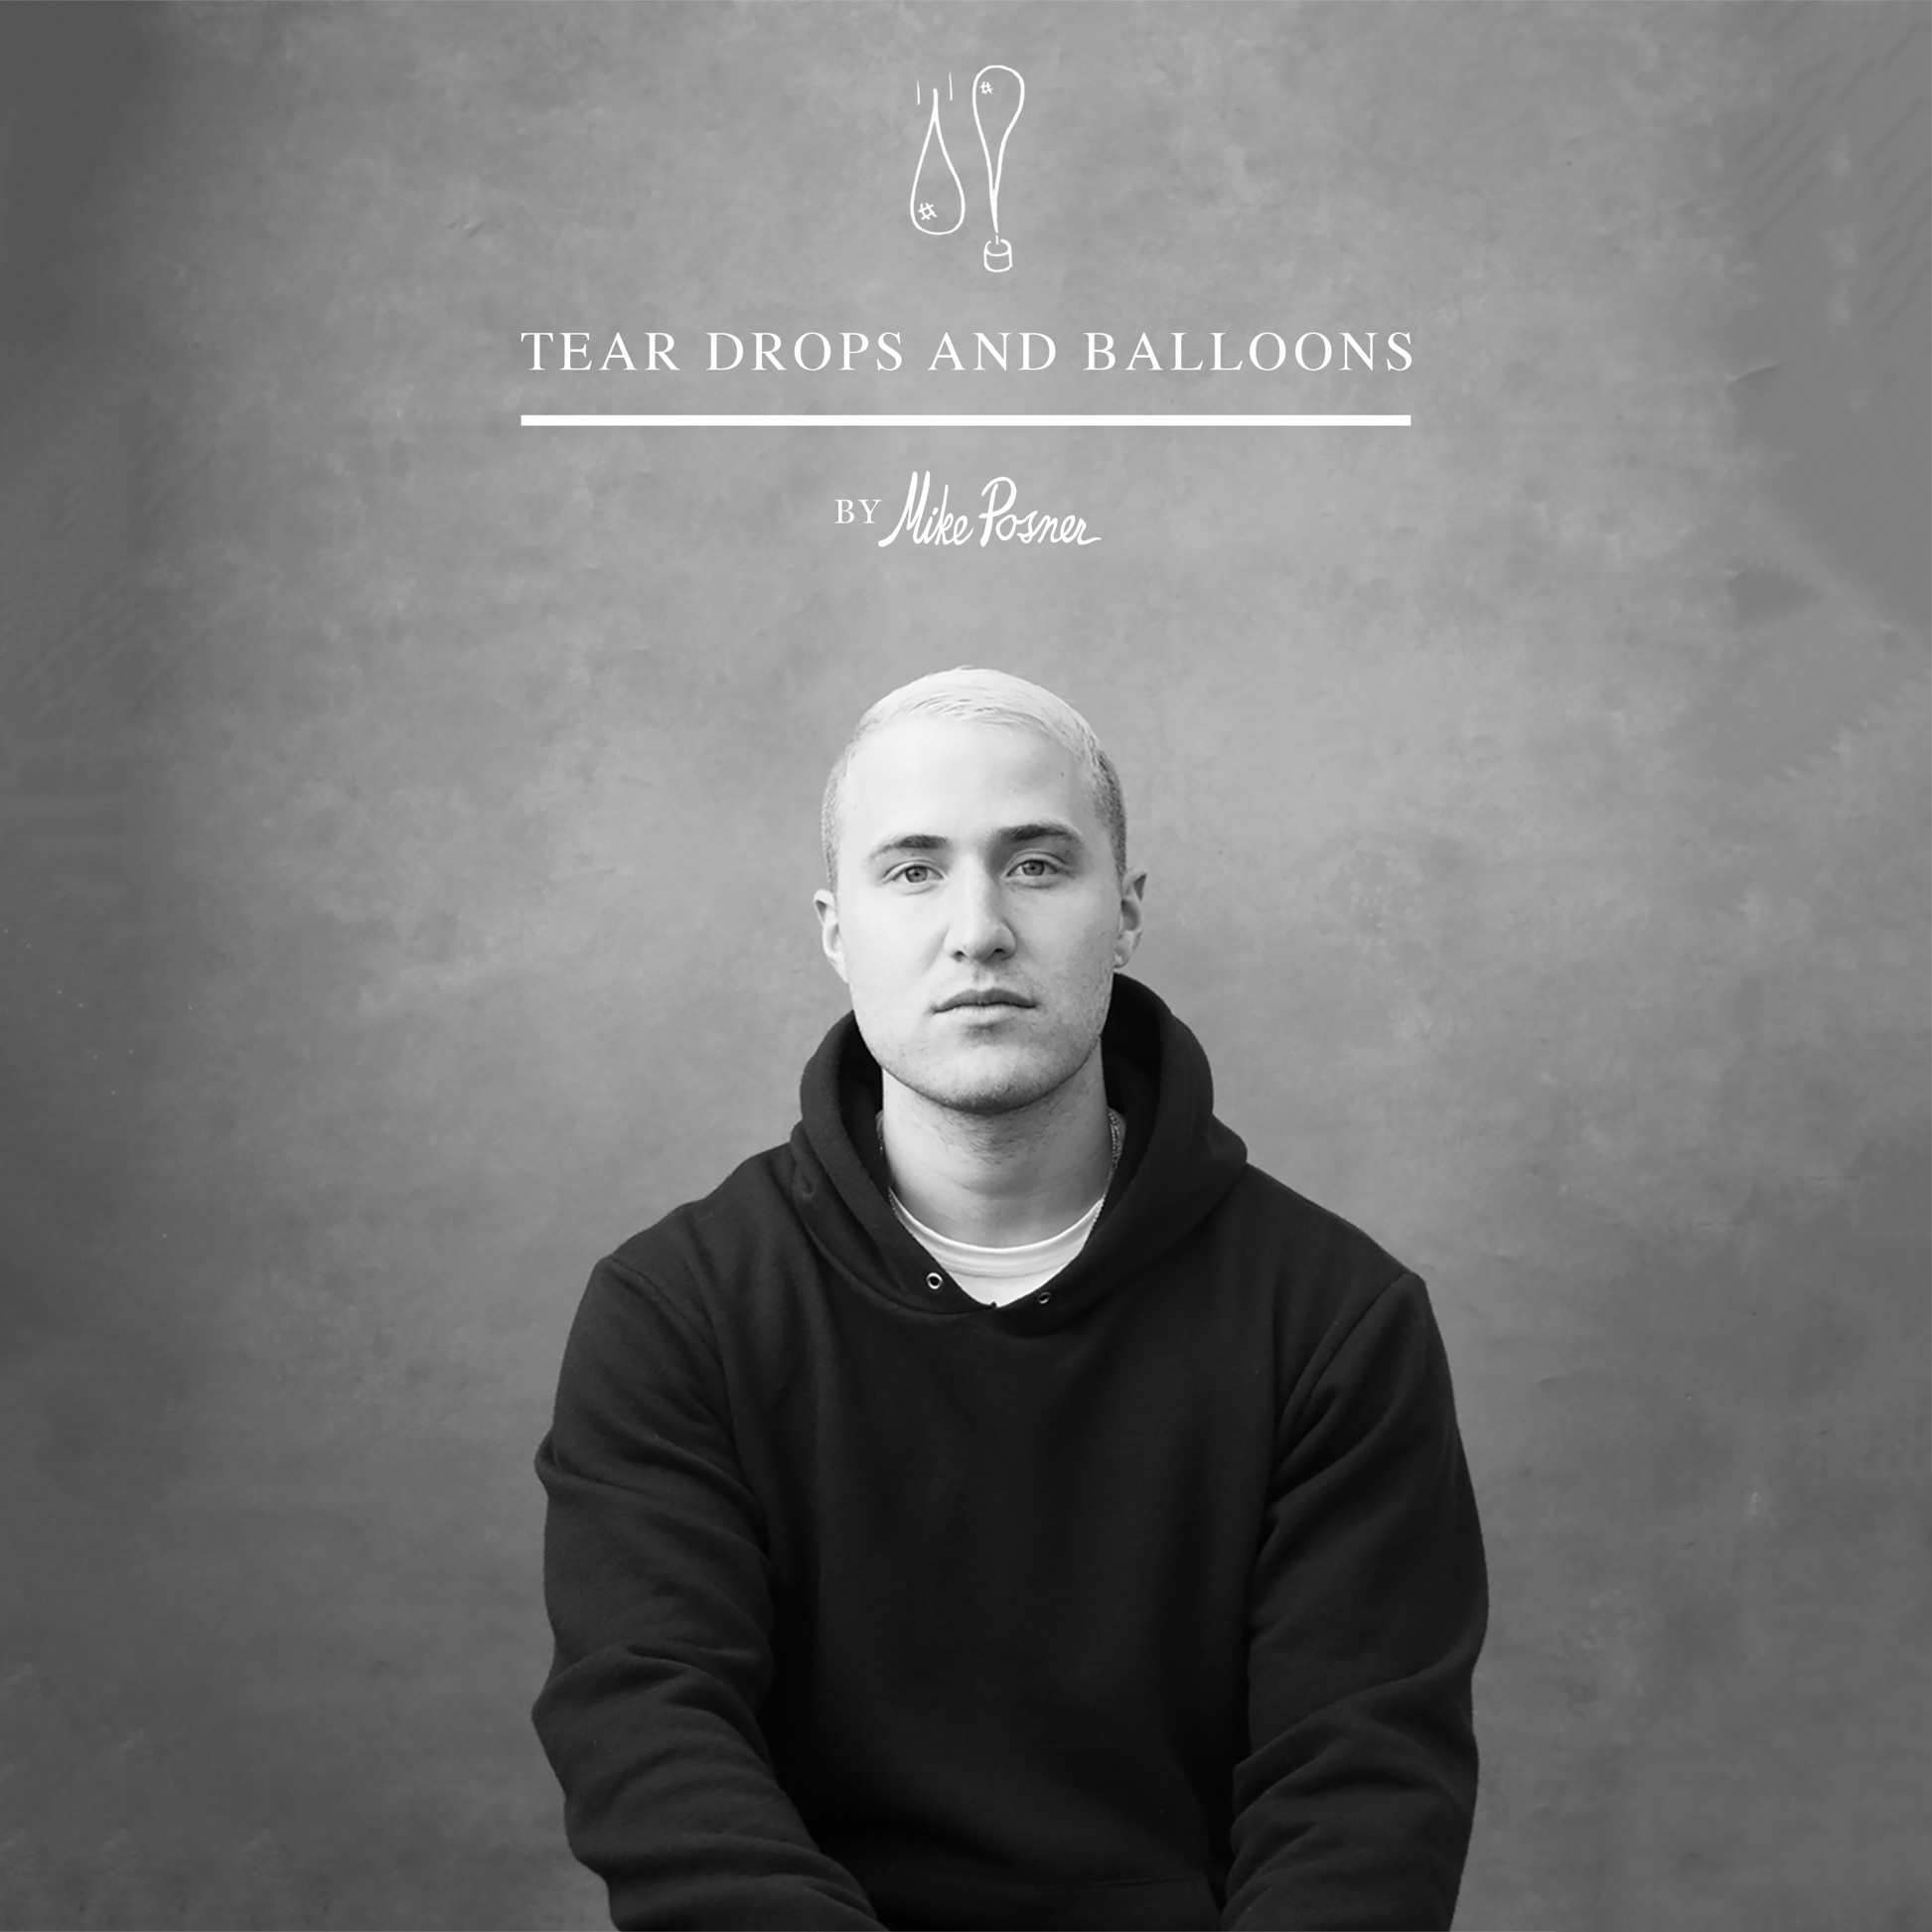 Mike Posner - Tear Drops And Balloons (Cover Artwork)
Release date: March 7, 2018 
Label: Monster Mountain Records
